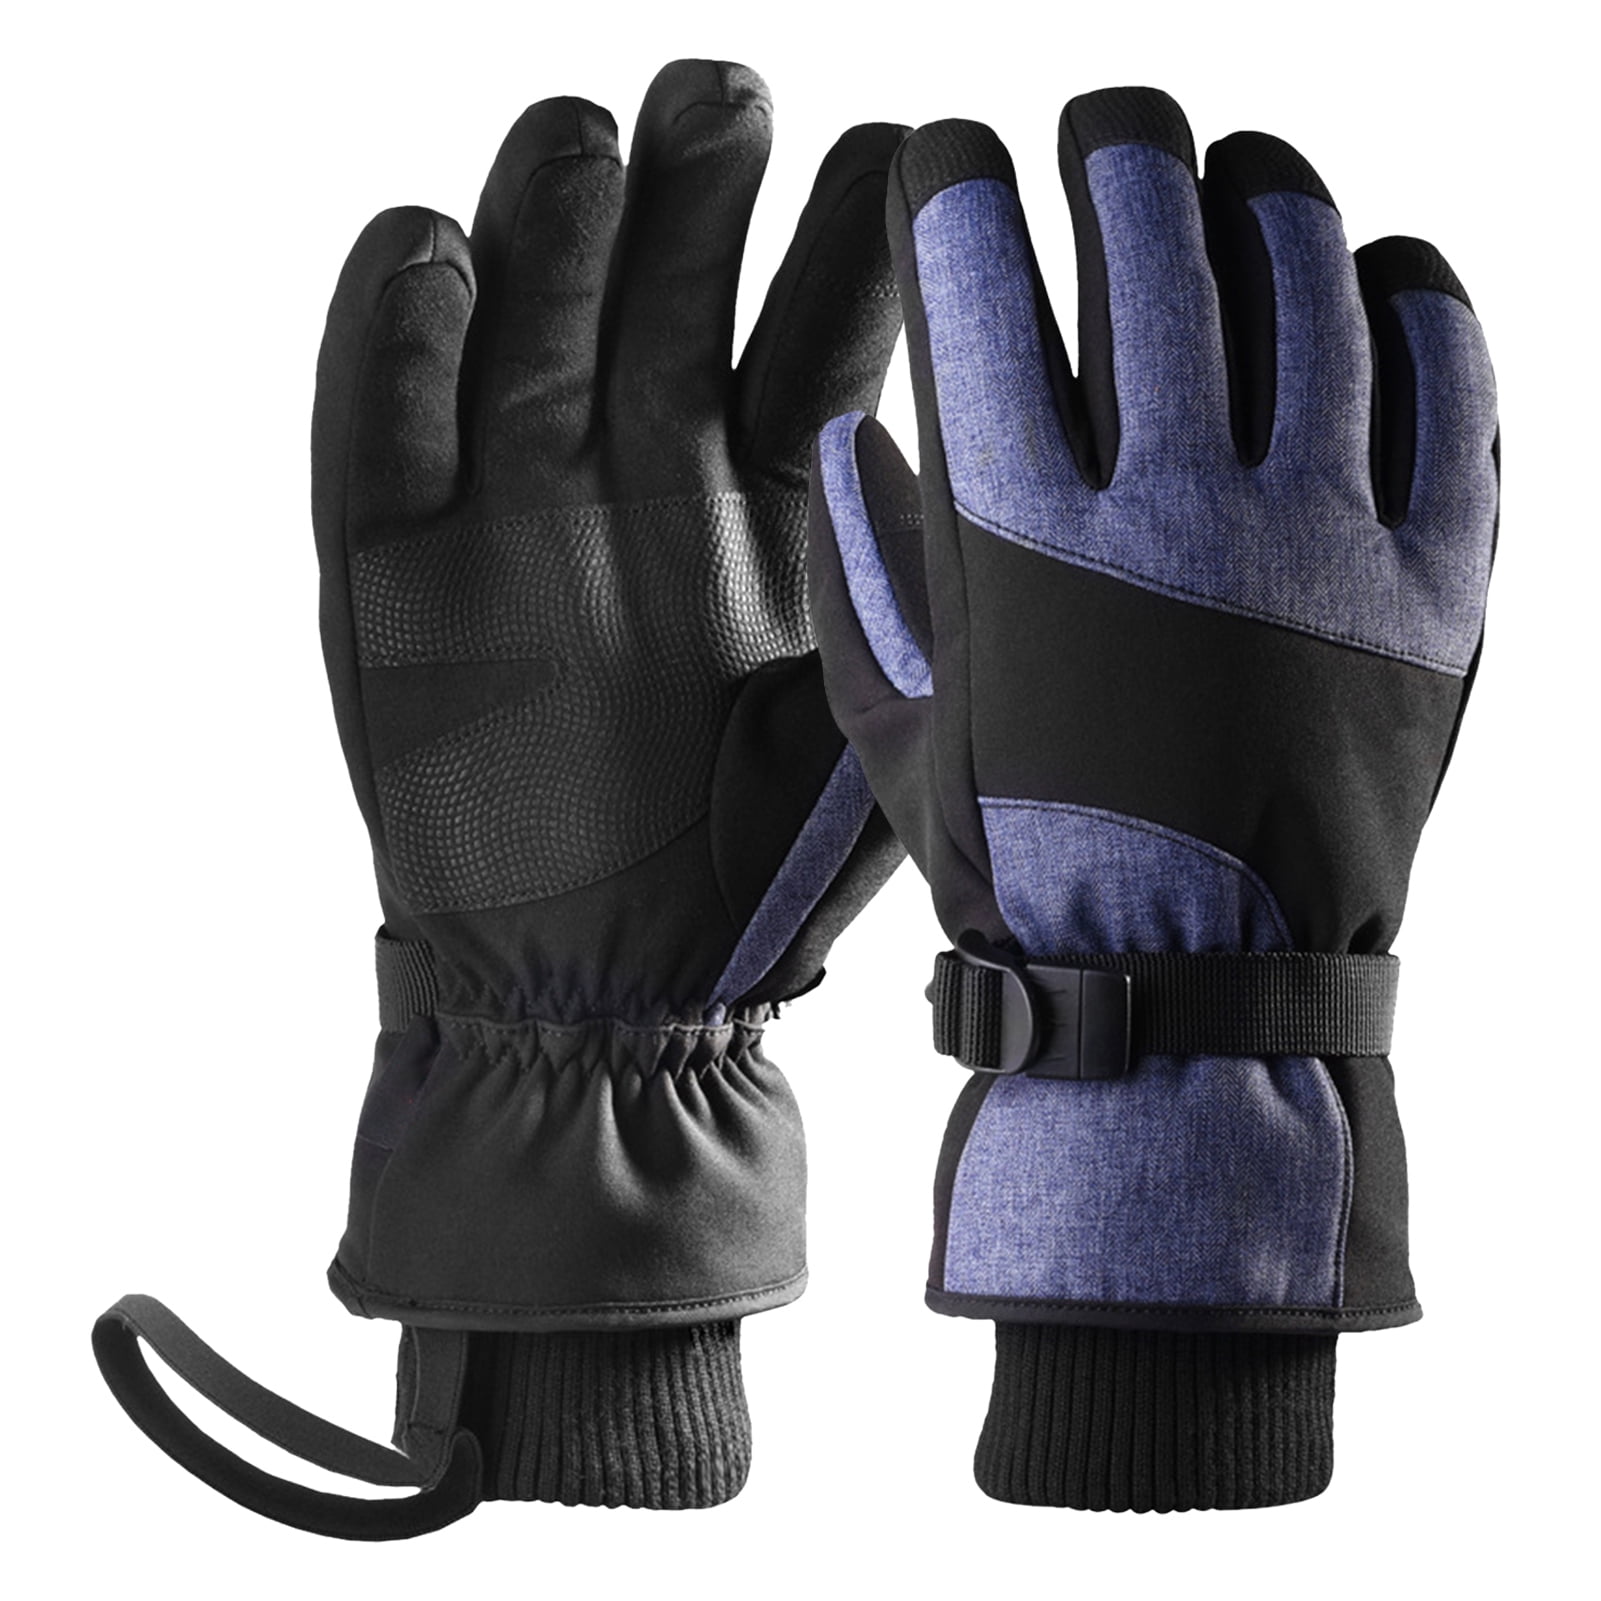 Details about   1 Pair Adults Winter Gloves Waterproof Thermal Wind Ski Warm Snow Outdoor Sports 